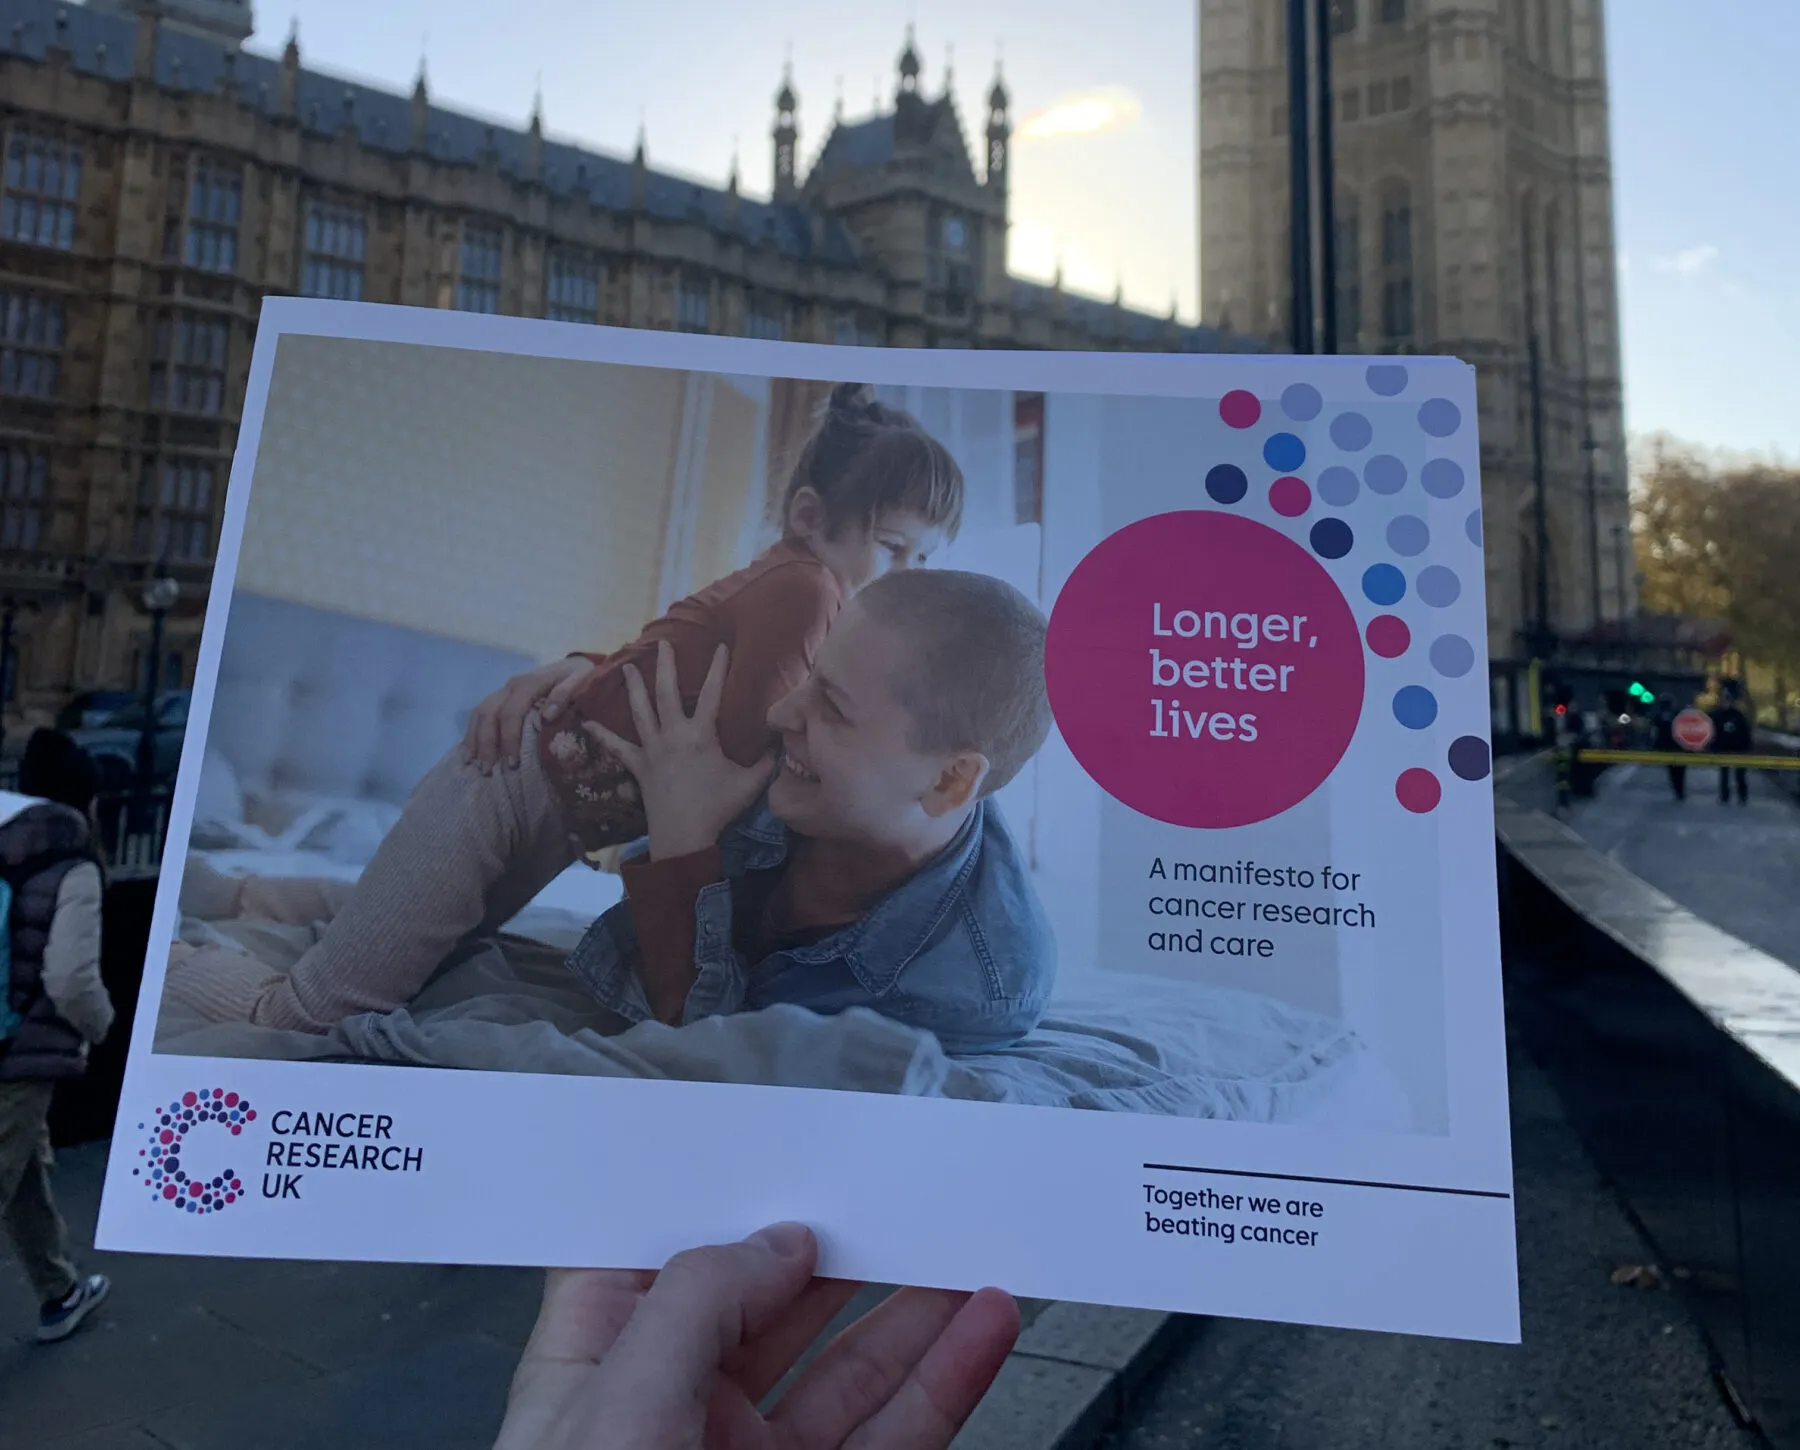 An image of Longer, better, lives: A manifesto for research and care, being help up outside of Westminster